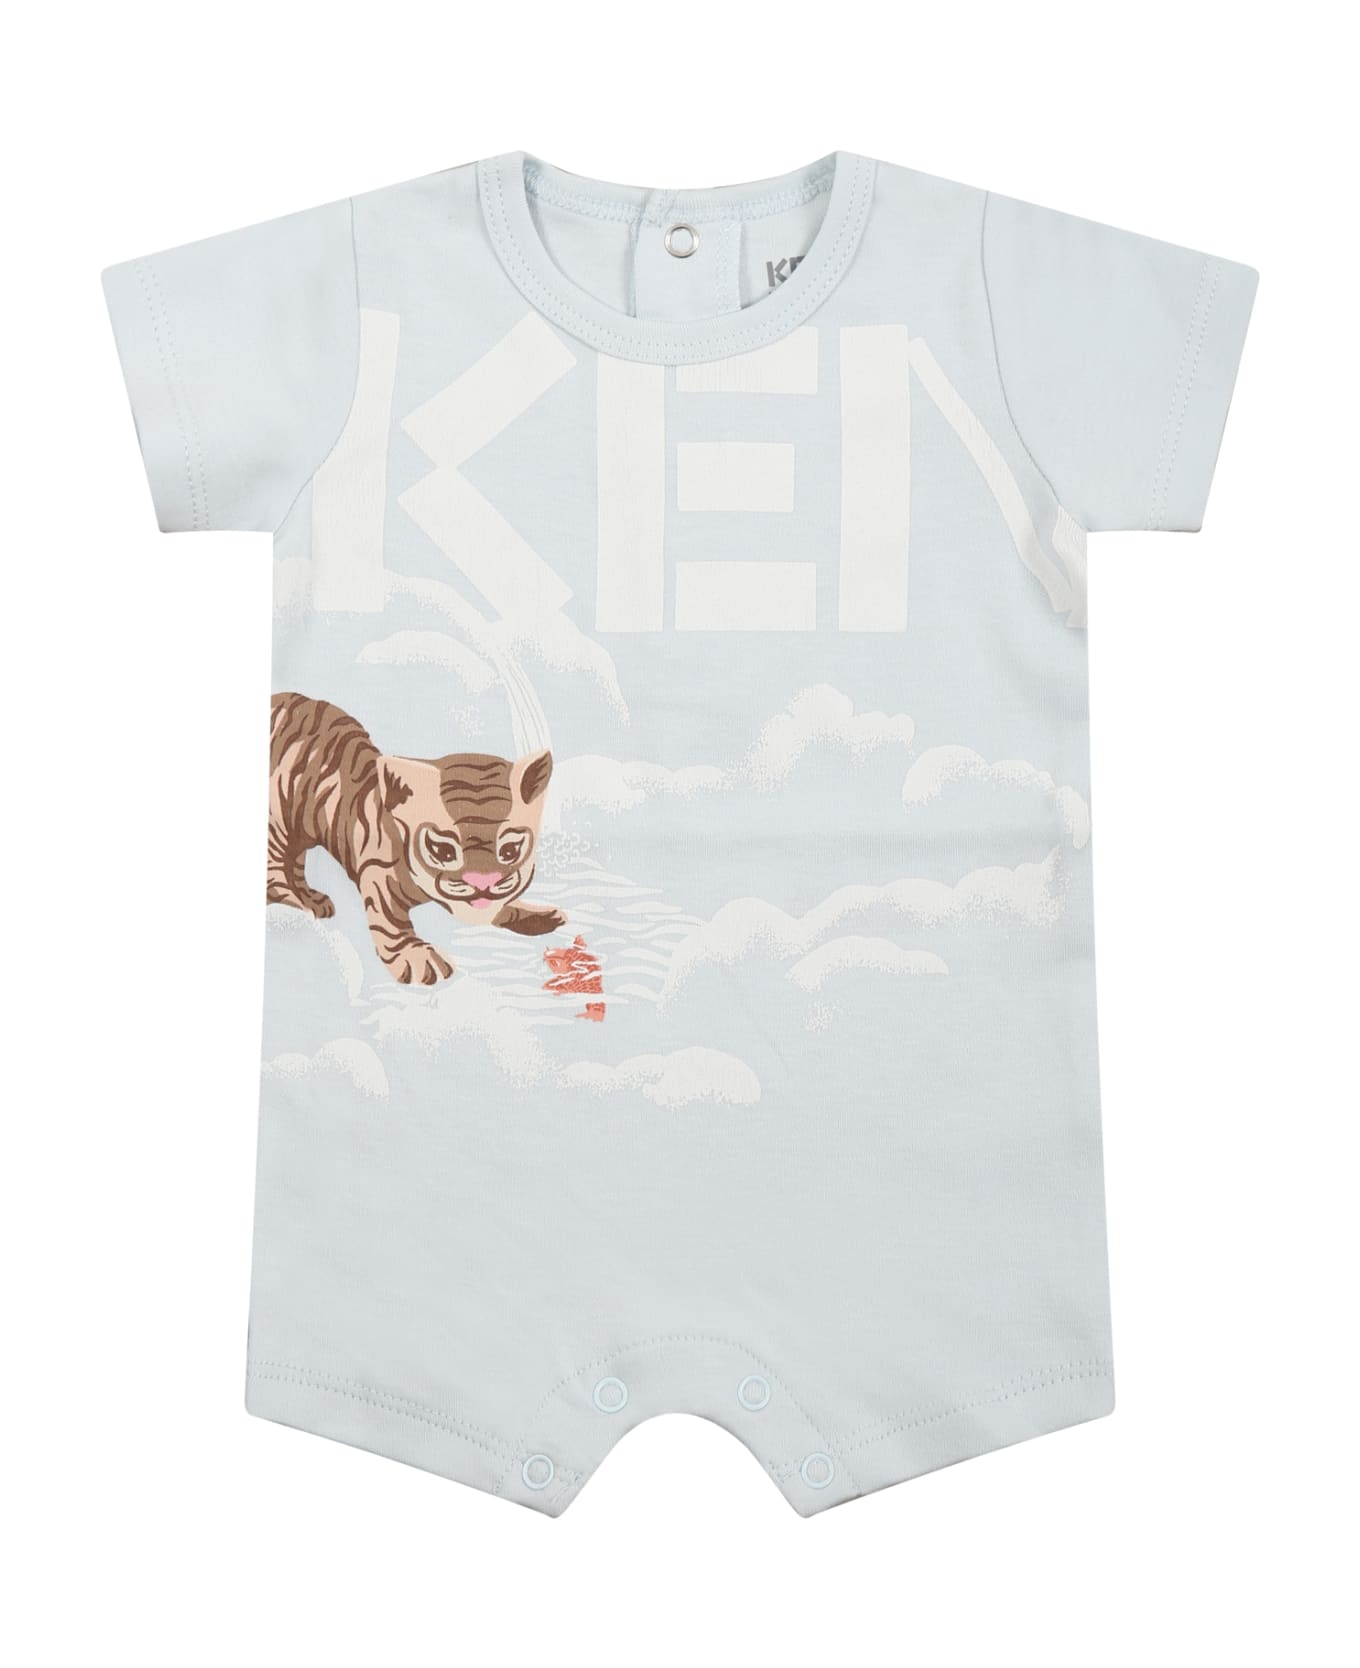 Kenzo Kids Light Blue Romper For Baby Boy With Animals And Logo - Light Blue